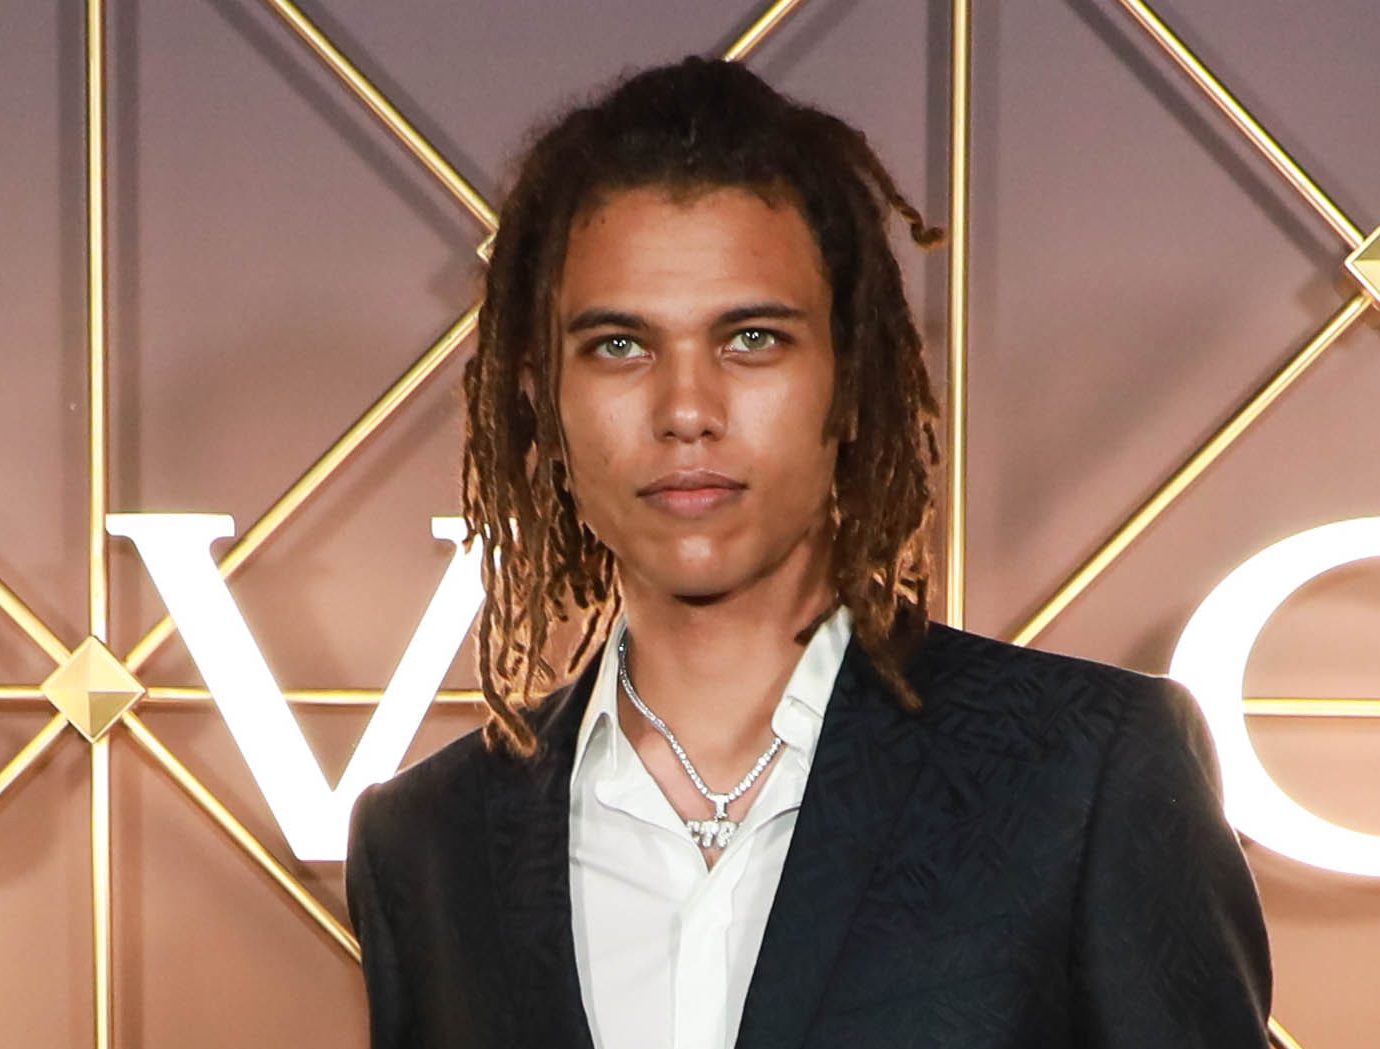 <p>Roberto Rossellini, who was born in 1993, is -- like his mother and big sister before him -- a successful model. He's seen here at the Bulgari B.Zero1 event during New York Fashion Week: The Shows in September 2021. Roberto was named after his grandfather, famed Italian director Roberto Rossellini, who died in 1977.</p>